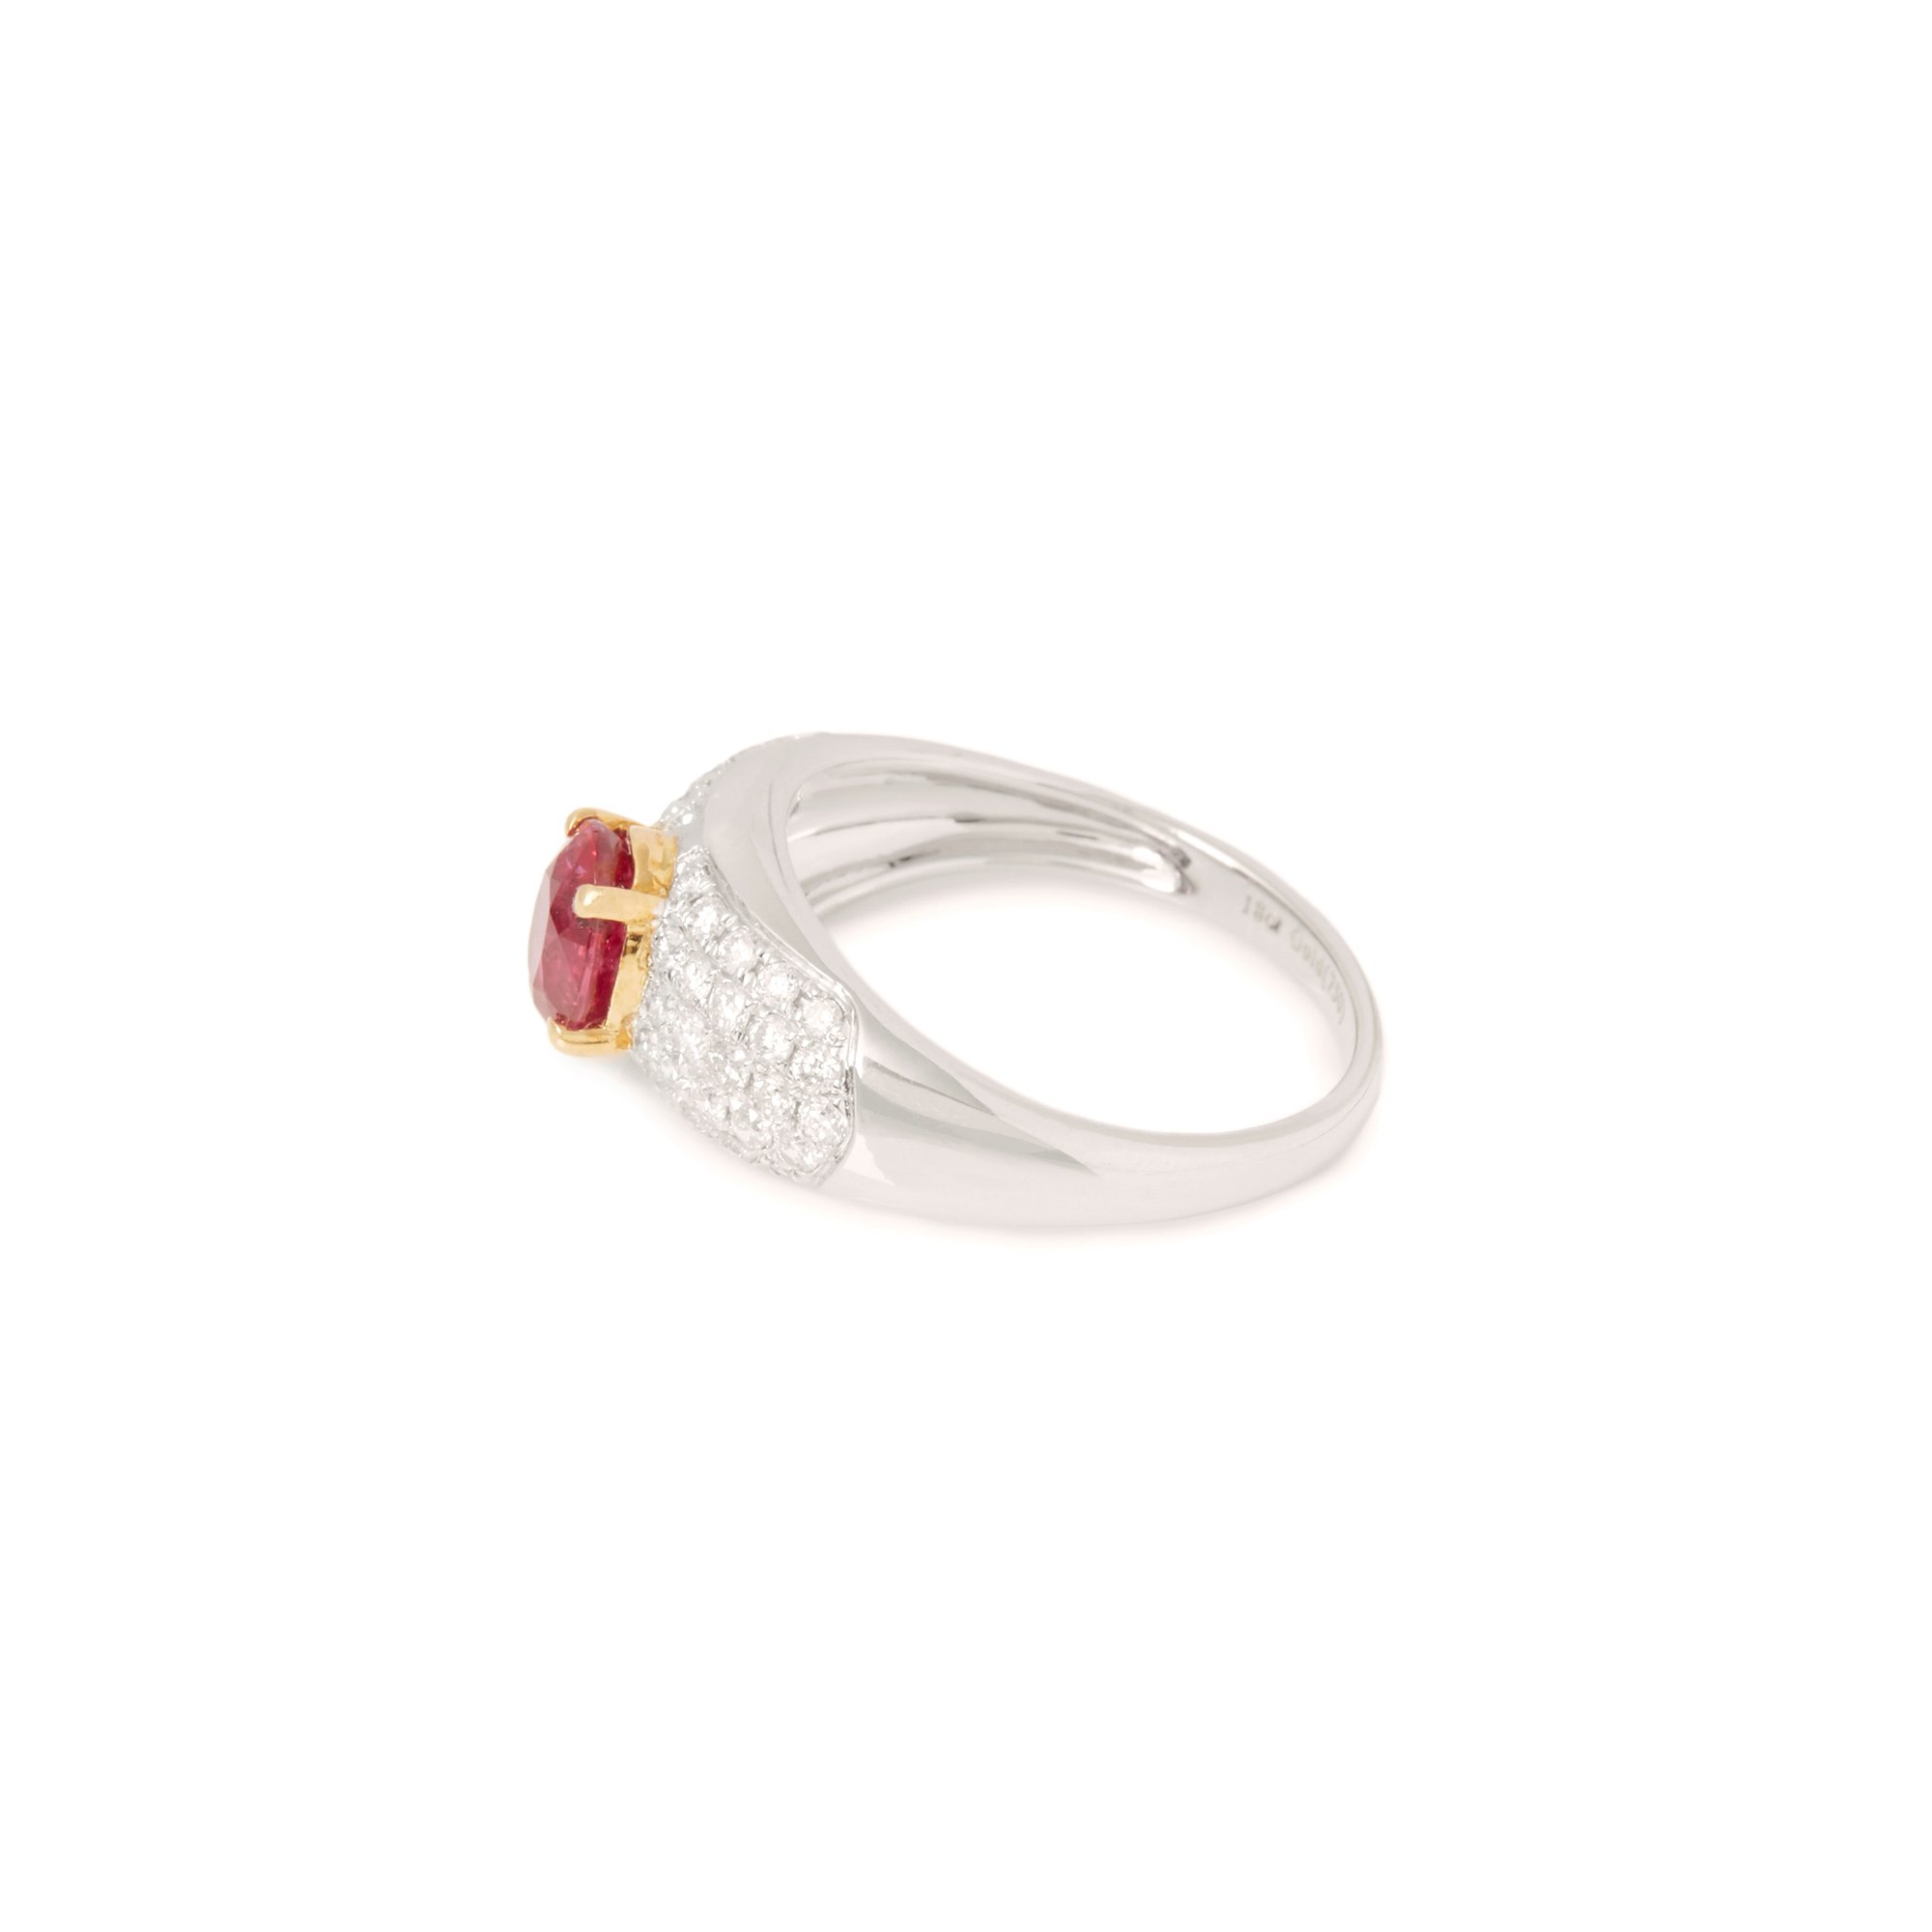 David Jerome Certified 1.21ct Untreated Mozambique Oval Cut Ruby and Diamond 18ct Gold Ring